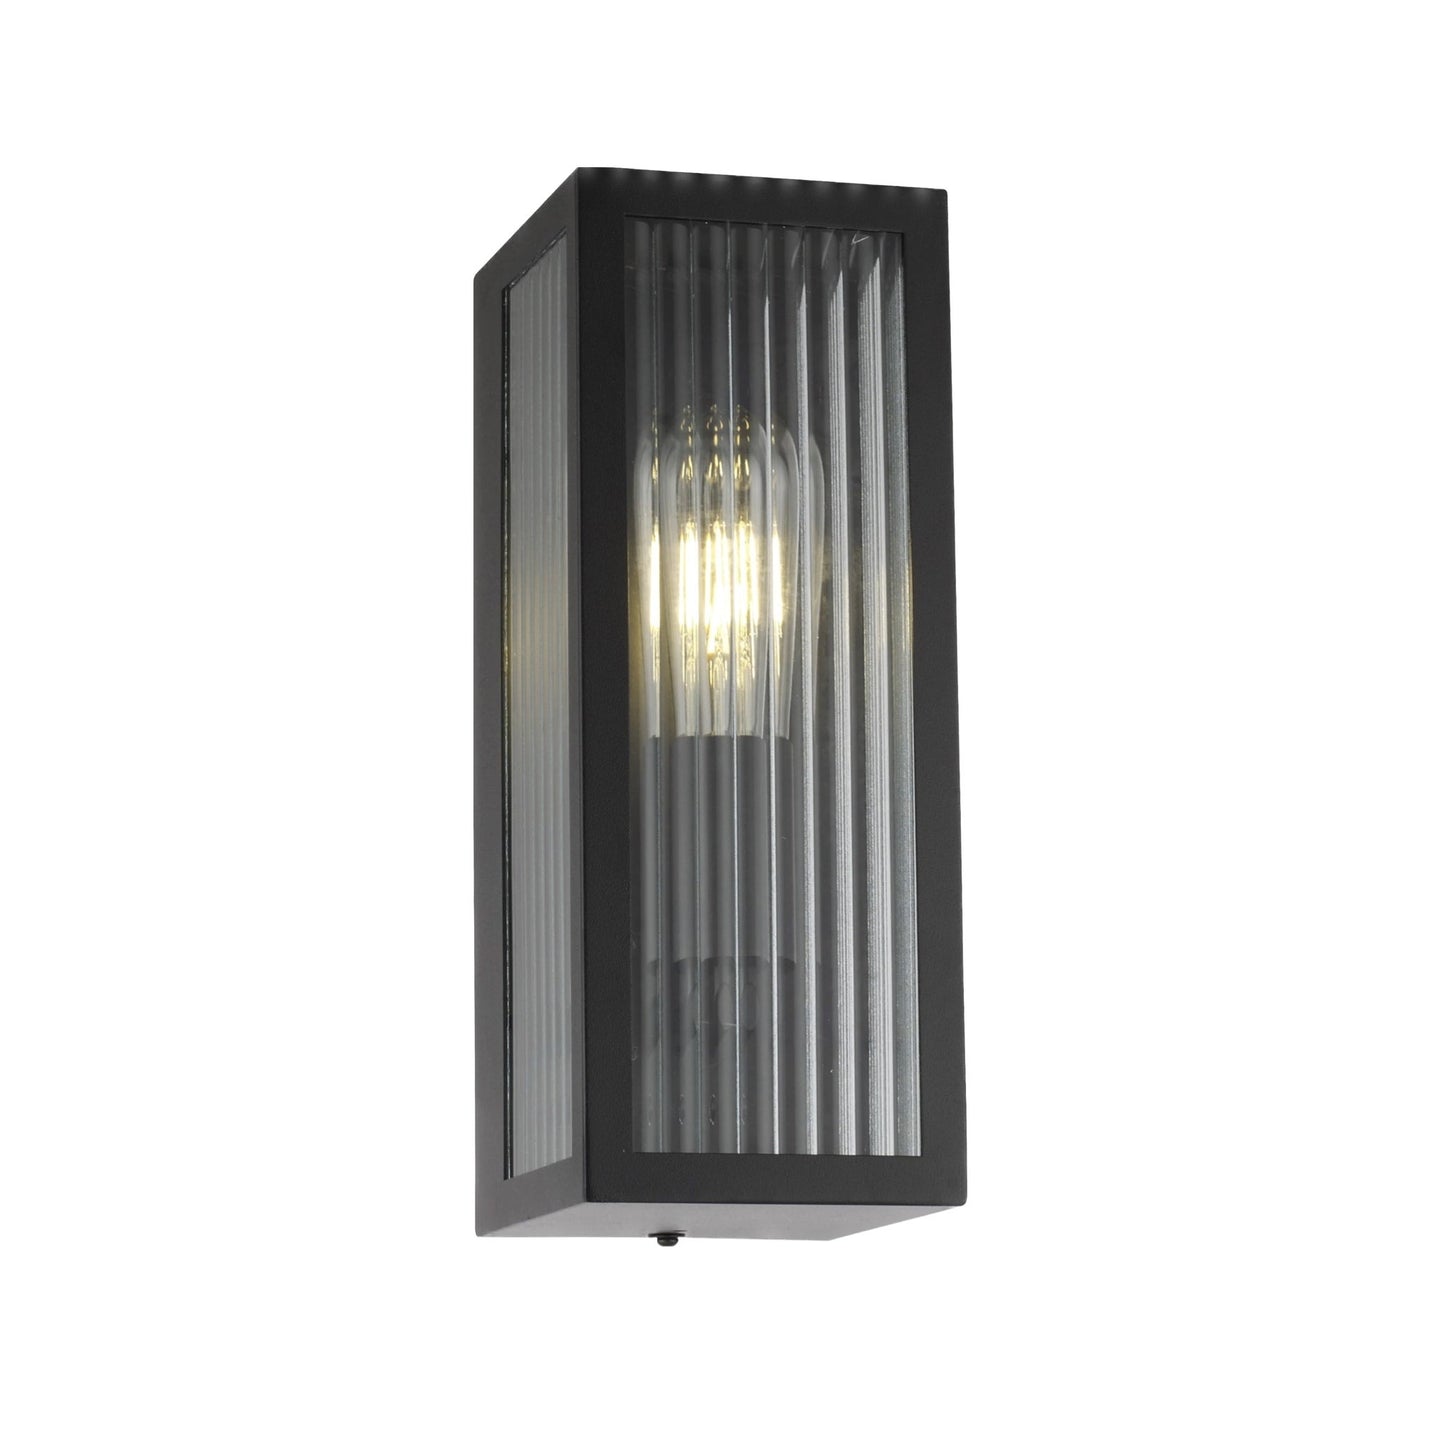 If you’re looking for a modern take on a traditional outdoor wall light, this modern bevelled glass rectangle wall light is perfect for adding style and protection for your home. This classic wall light is designed with a contemporary twist, styled with a rectangle shape and fitted with glass bevelled windows that allow the light to shine effectively. 